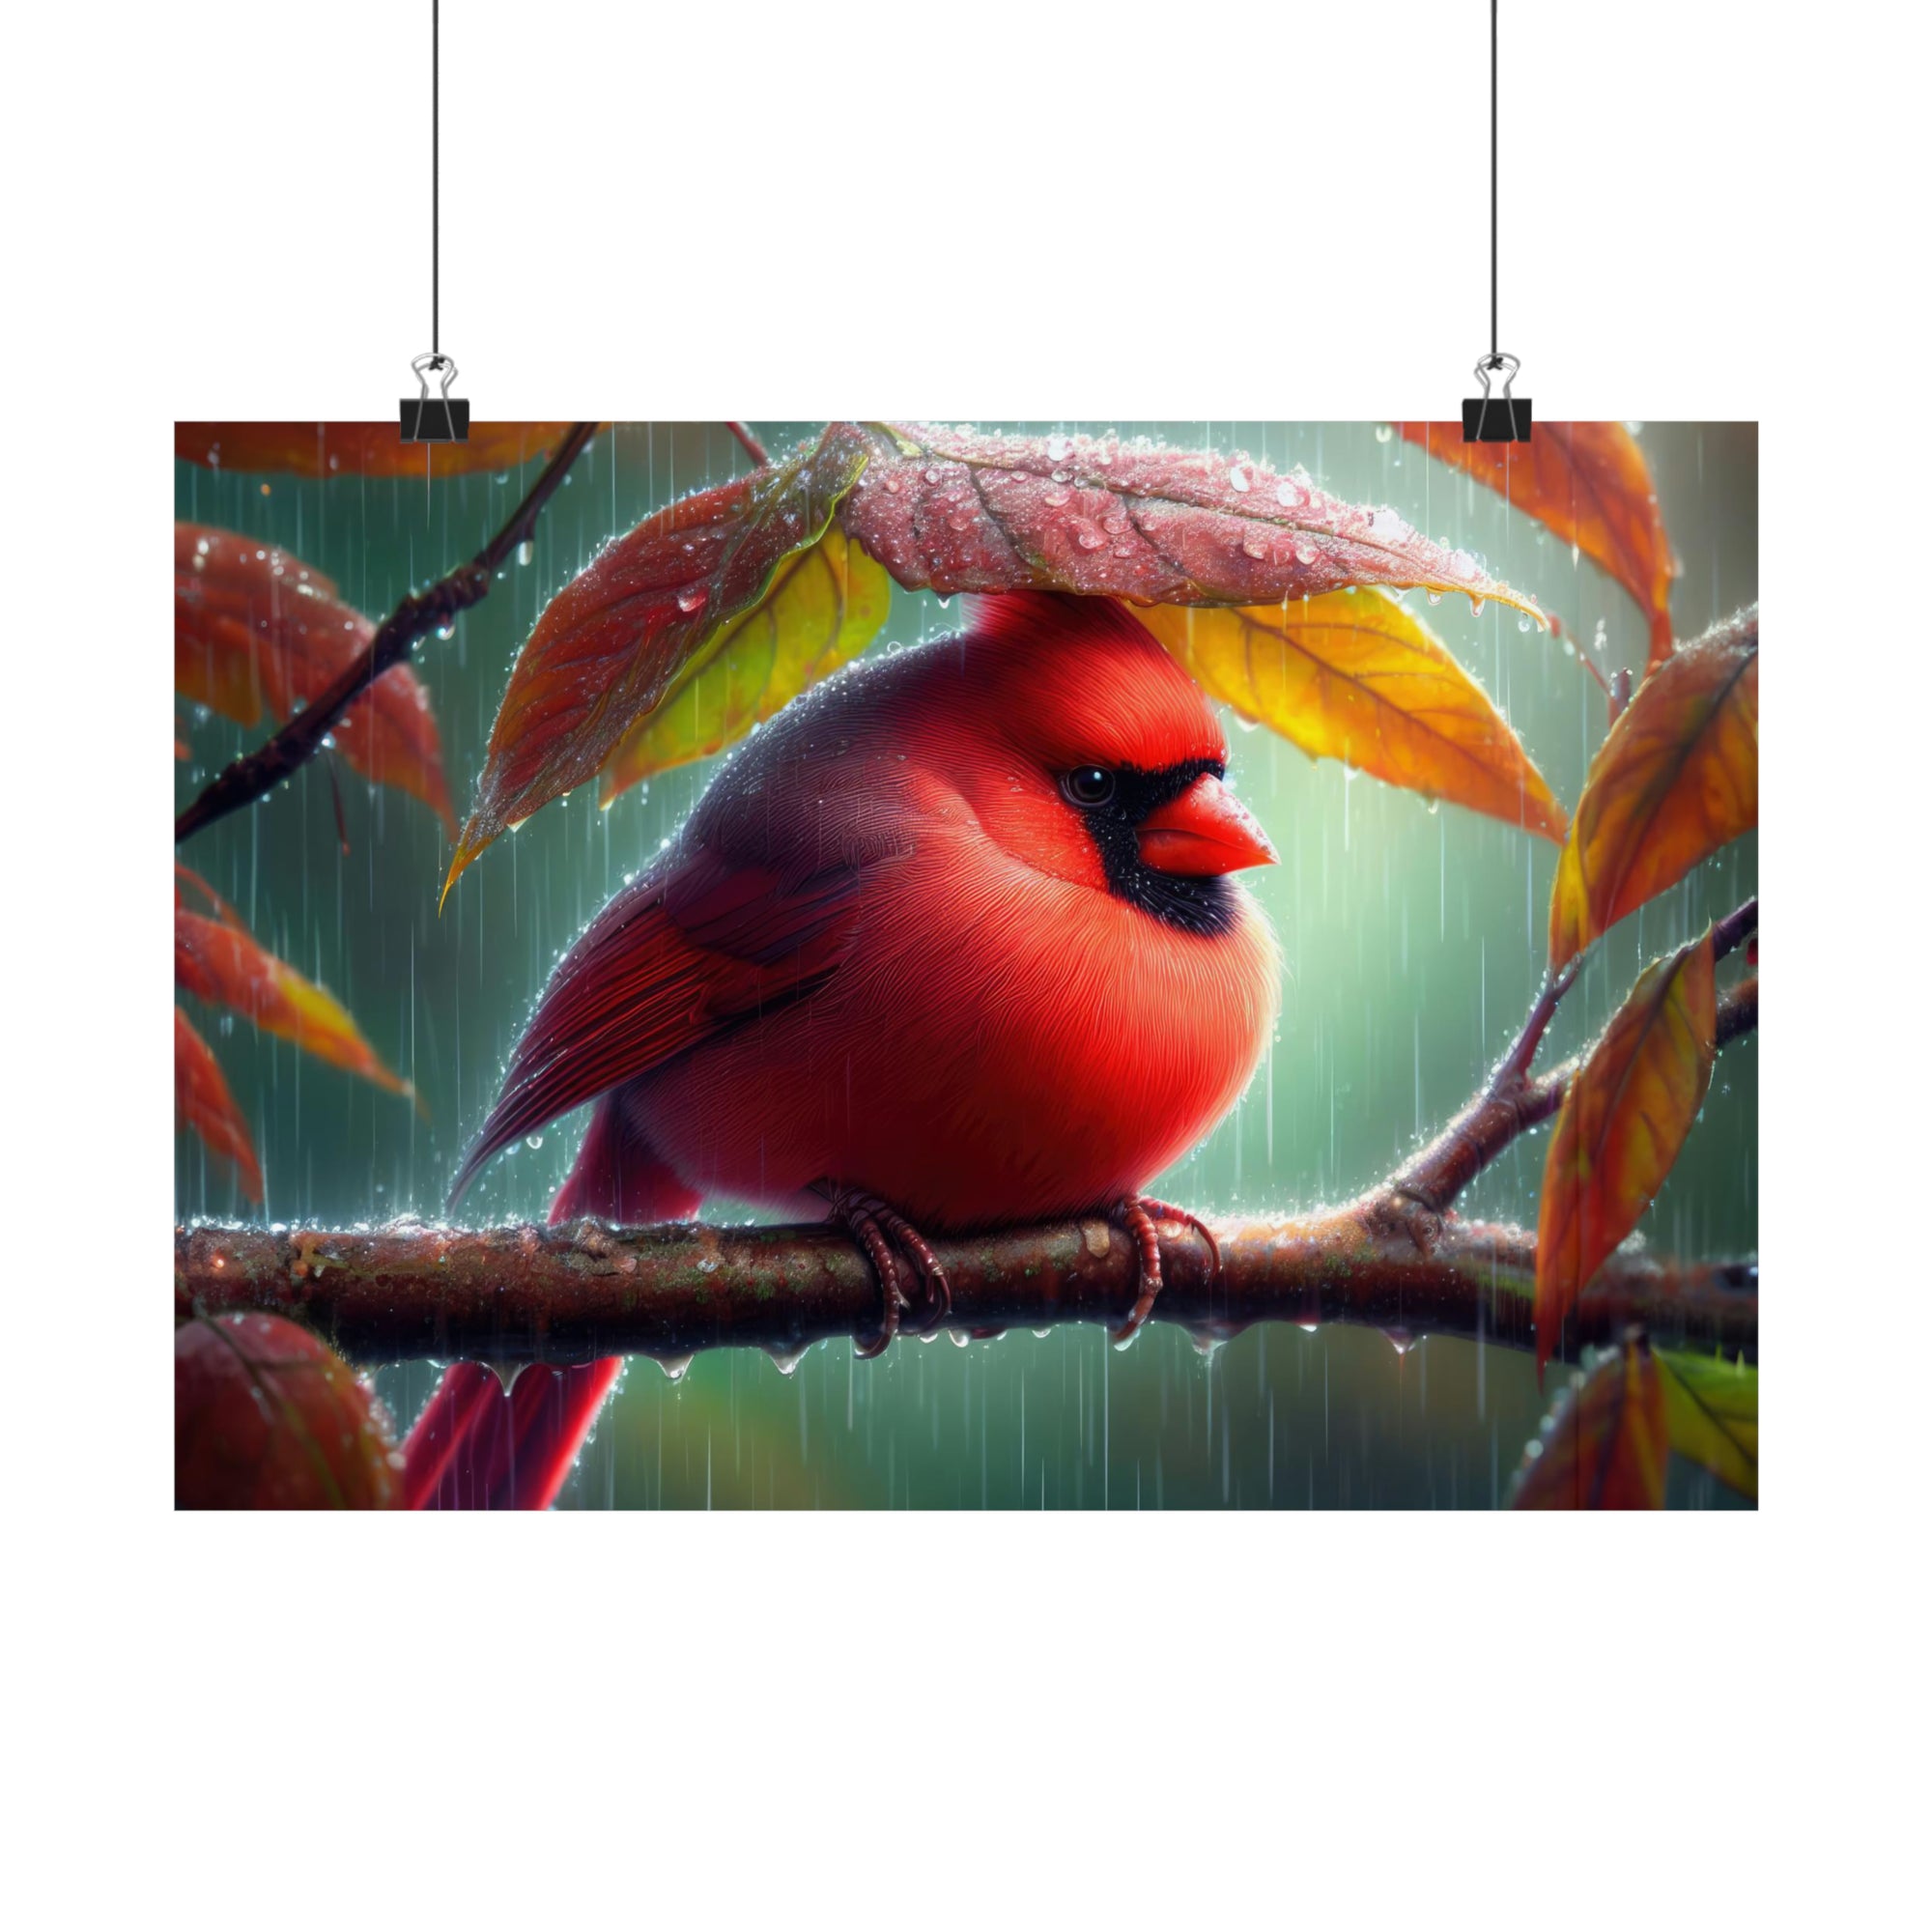 Drenched Cardinal Under a Leaf Canopy Poster